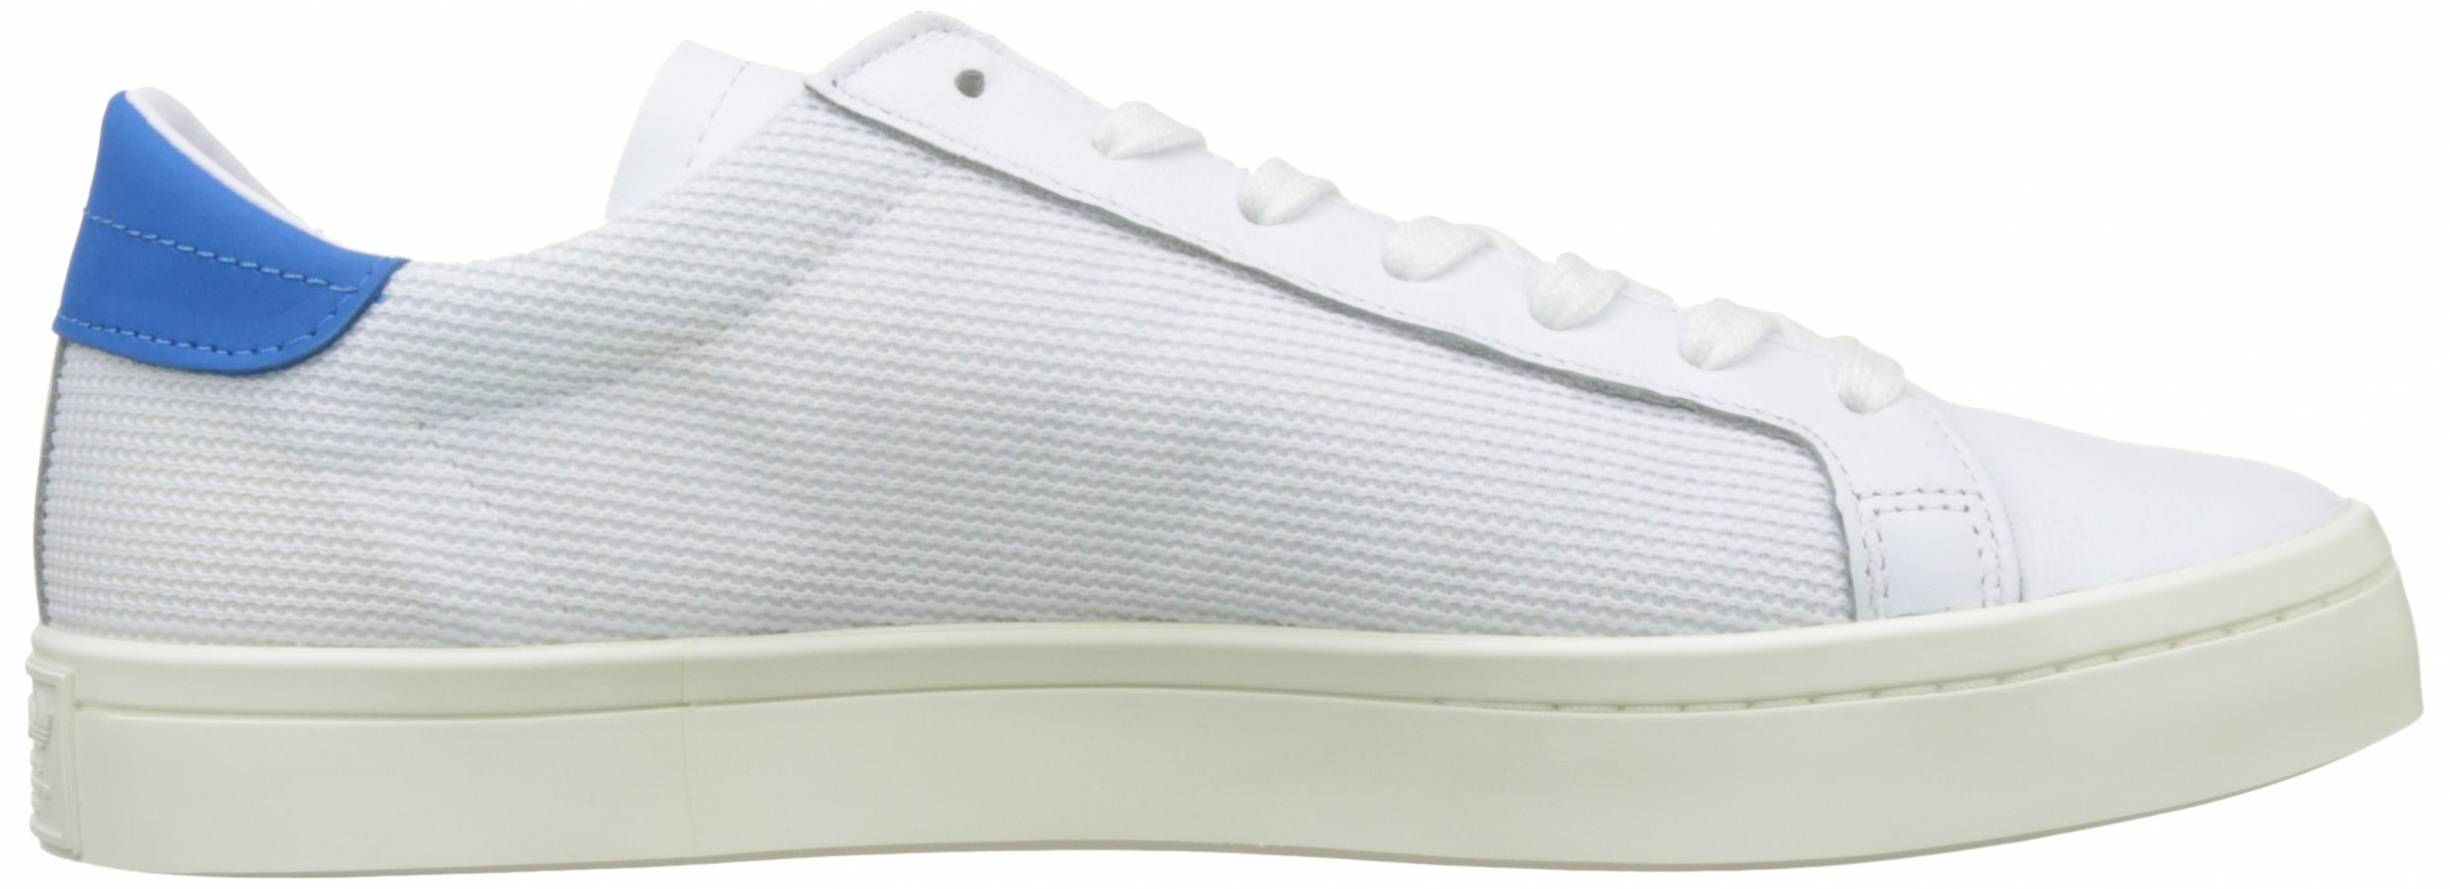 Adidas Court Vantage sneakers (only $56) | RunRepeat